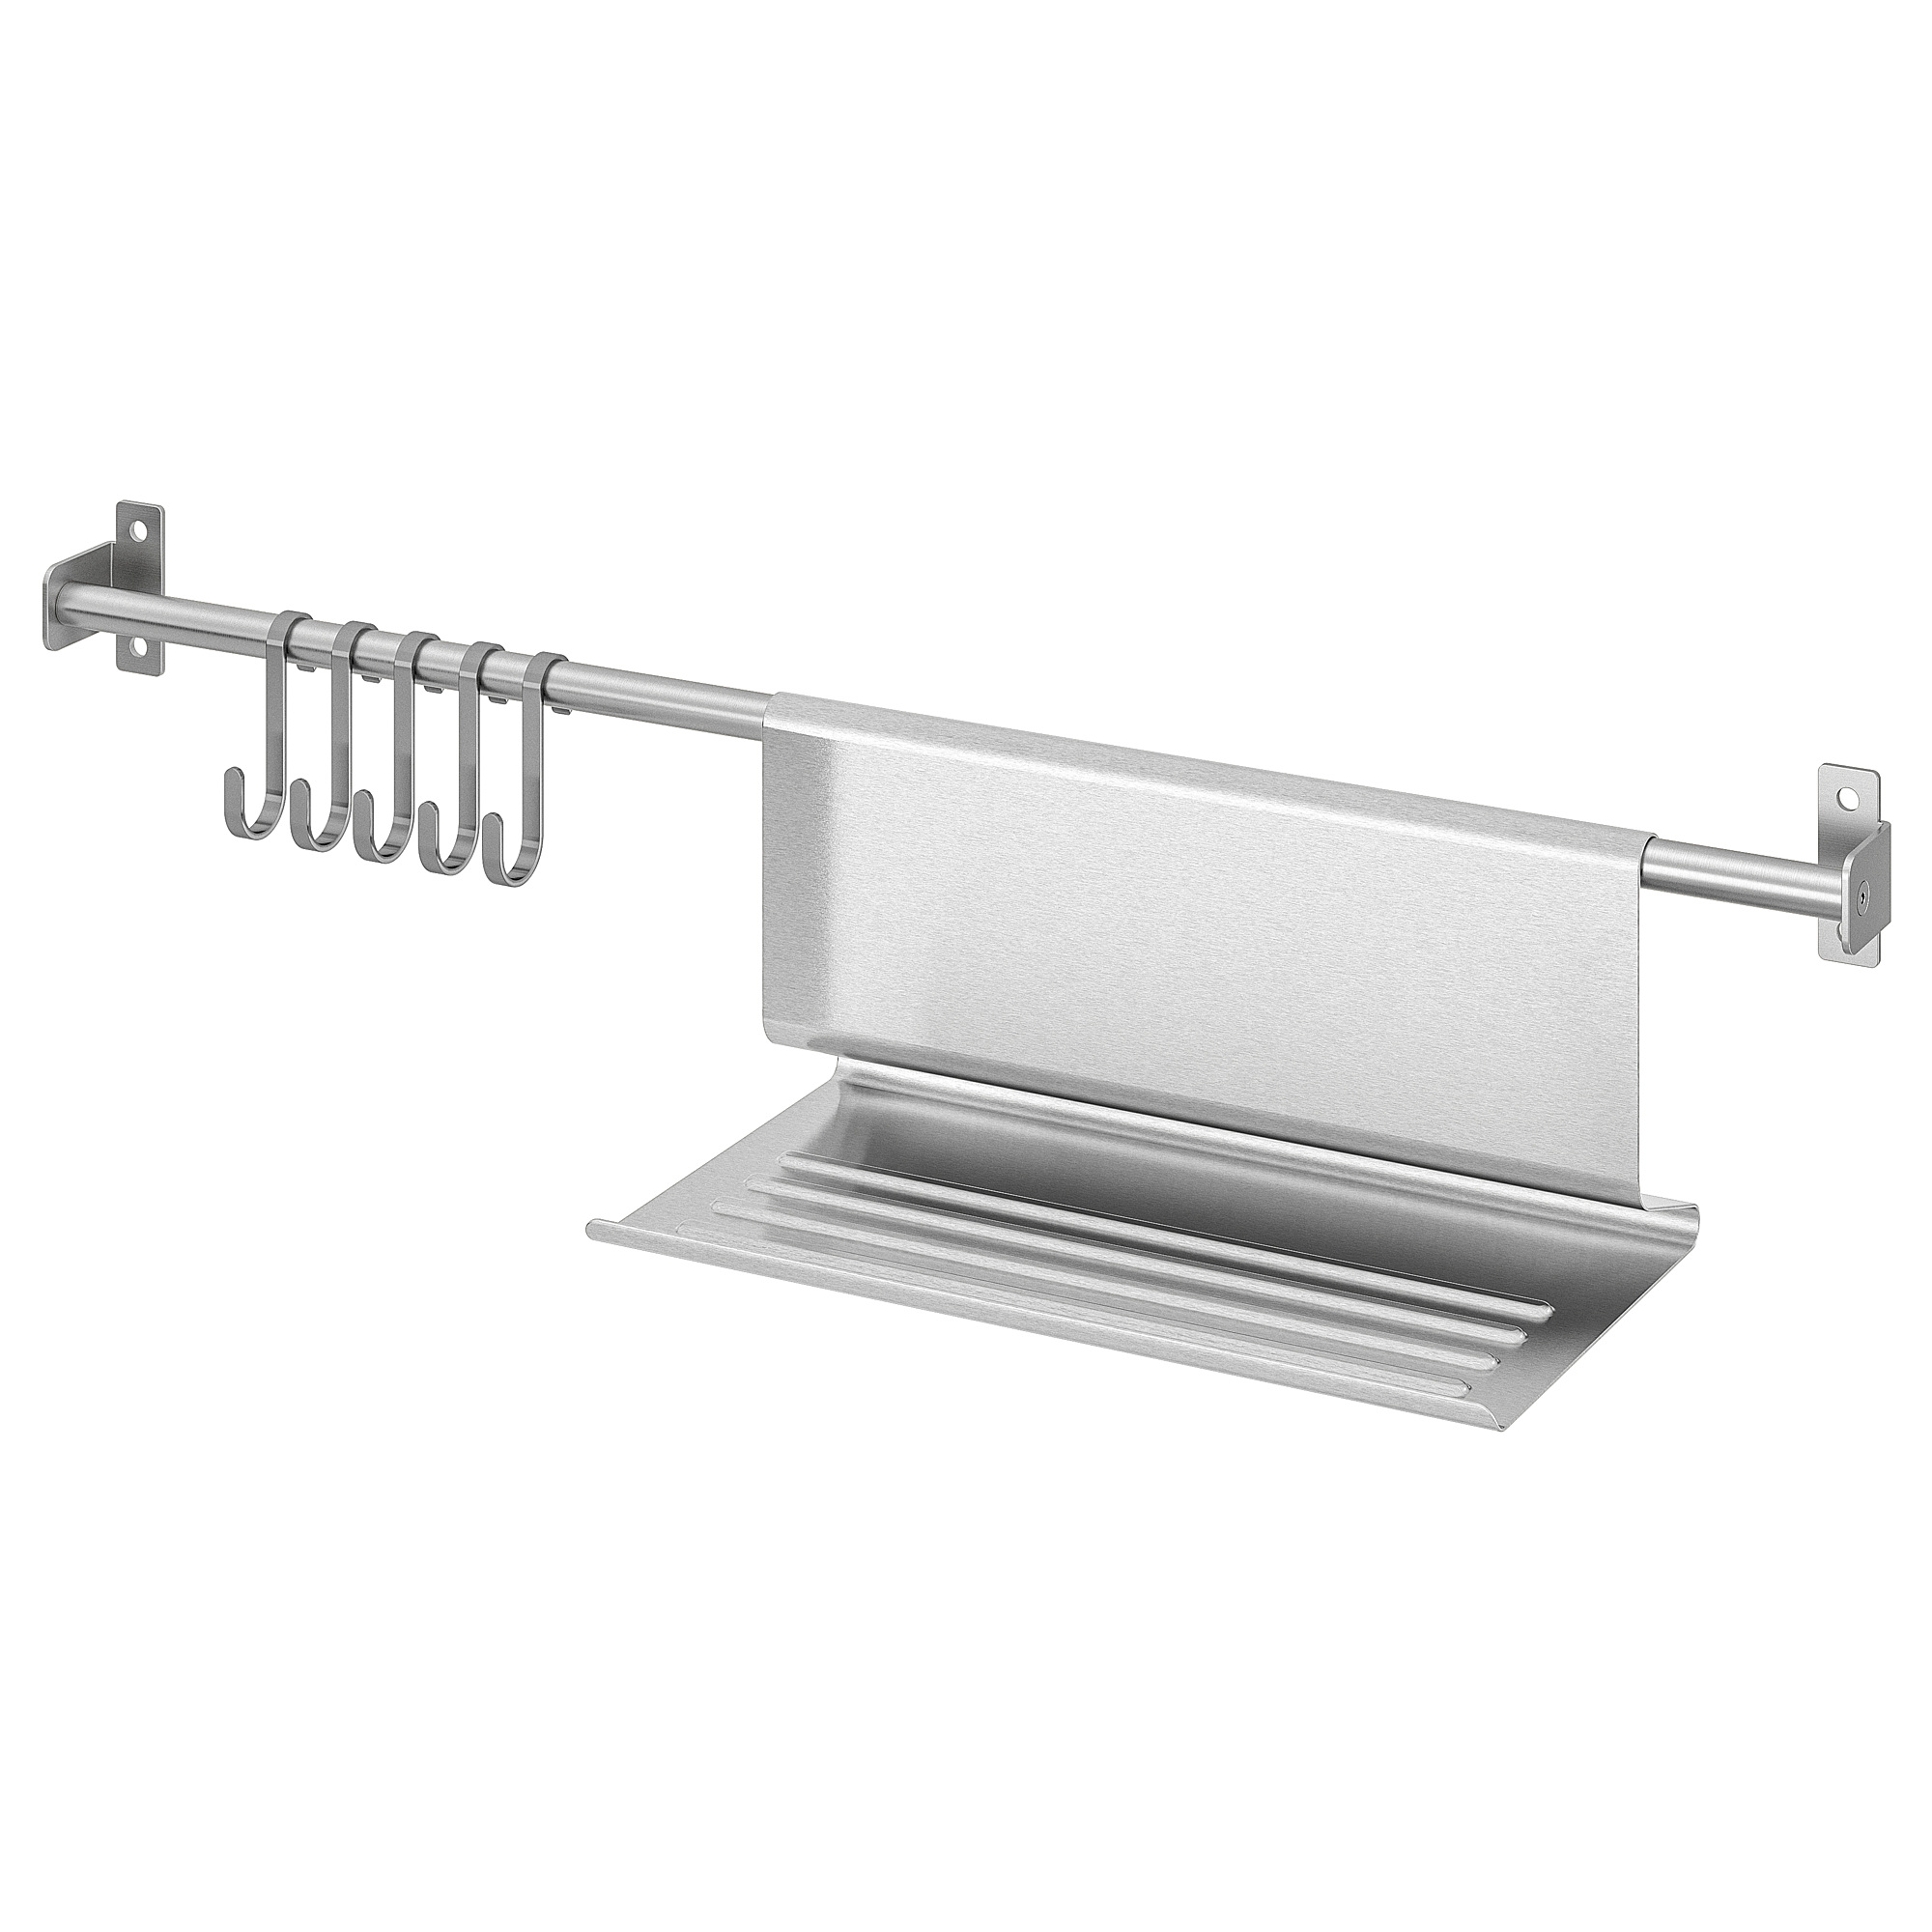 KUNGSFORS rail with 5 hooks and tablet stand